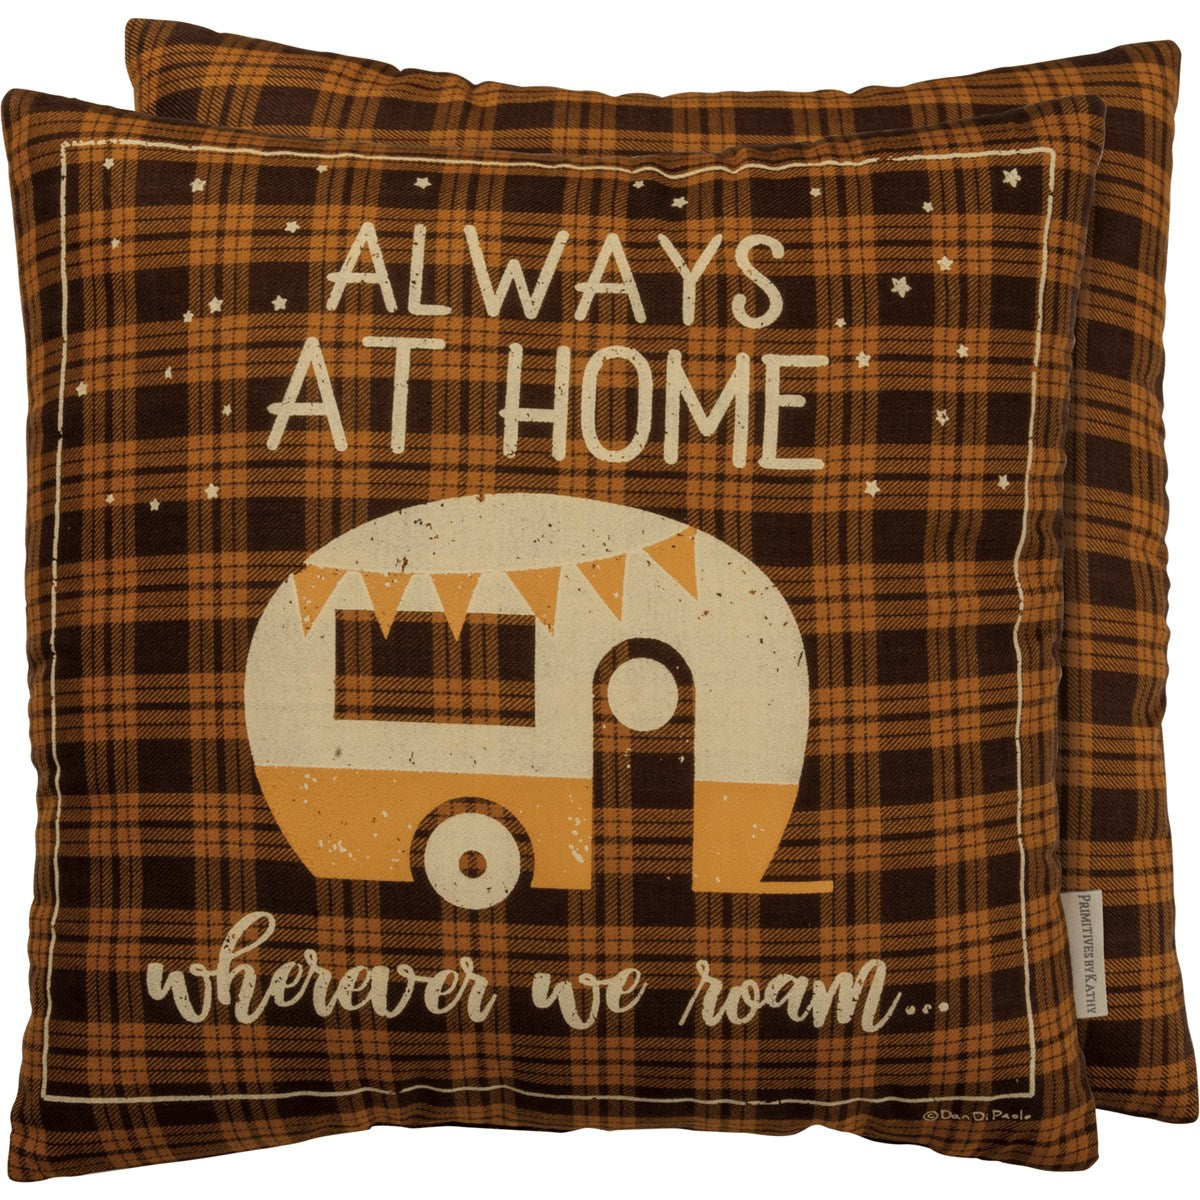 Primitives By Kathy Pillow - Always At Home Wherever We Roam-Primitives by Kathy-Little Giant Kidz